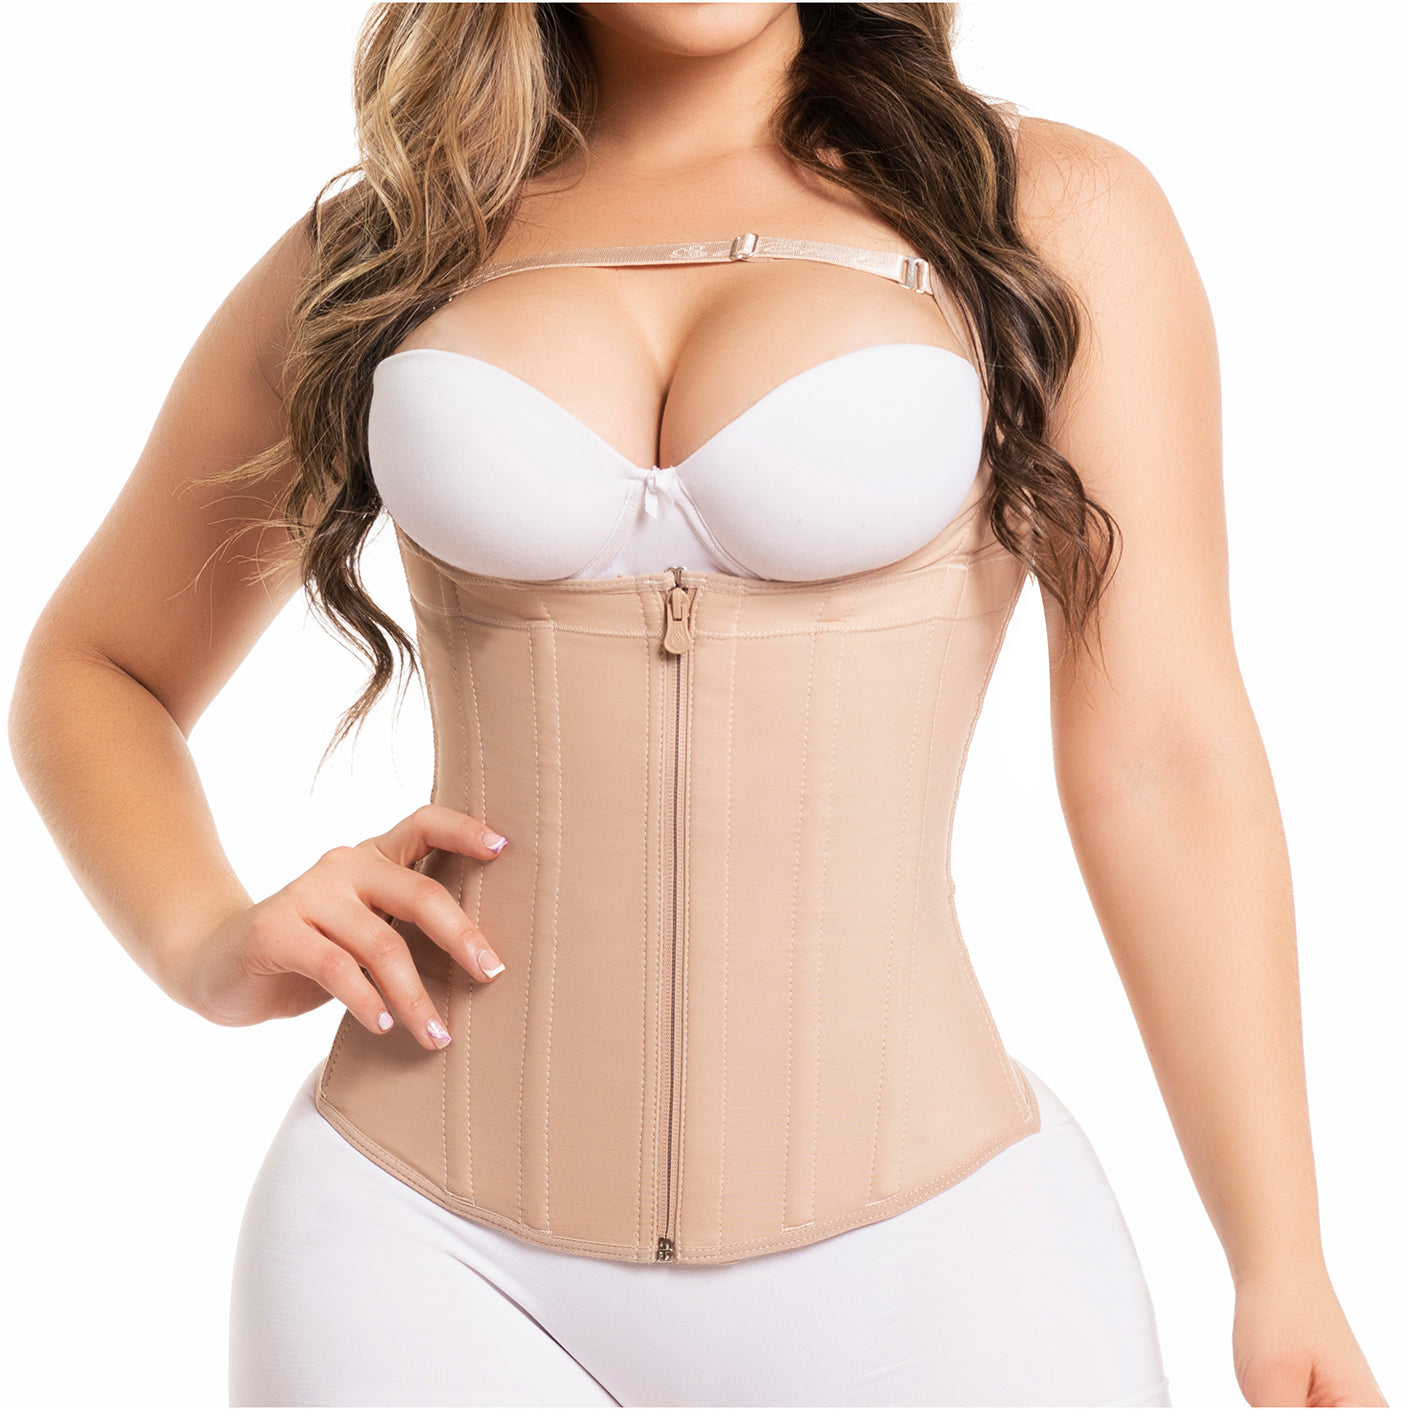 060 Faja Colombiana Body shaper to reduce measurements, half leg, daily  use, post-surgical, 2 levels of adjustable clasps, covered high back at   Women's Clothing store